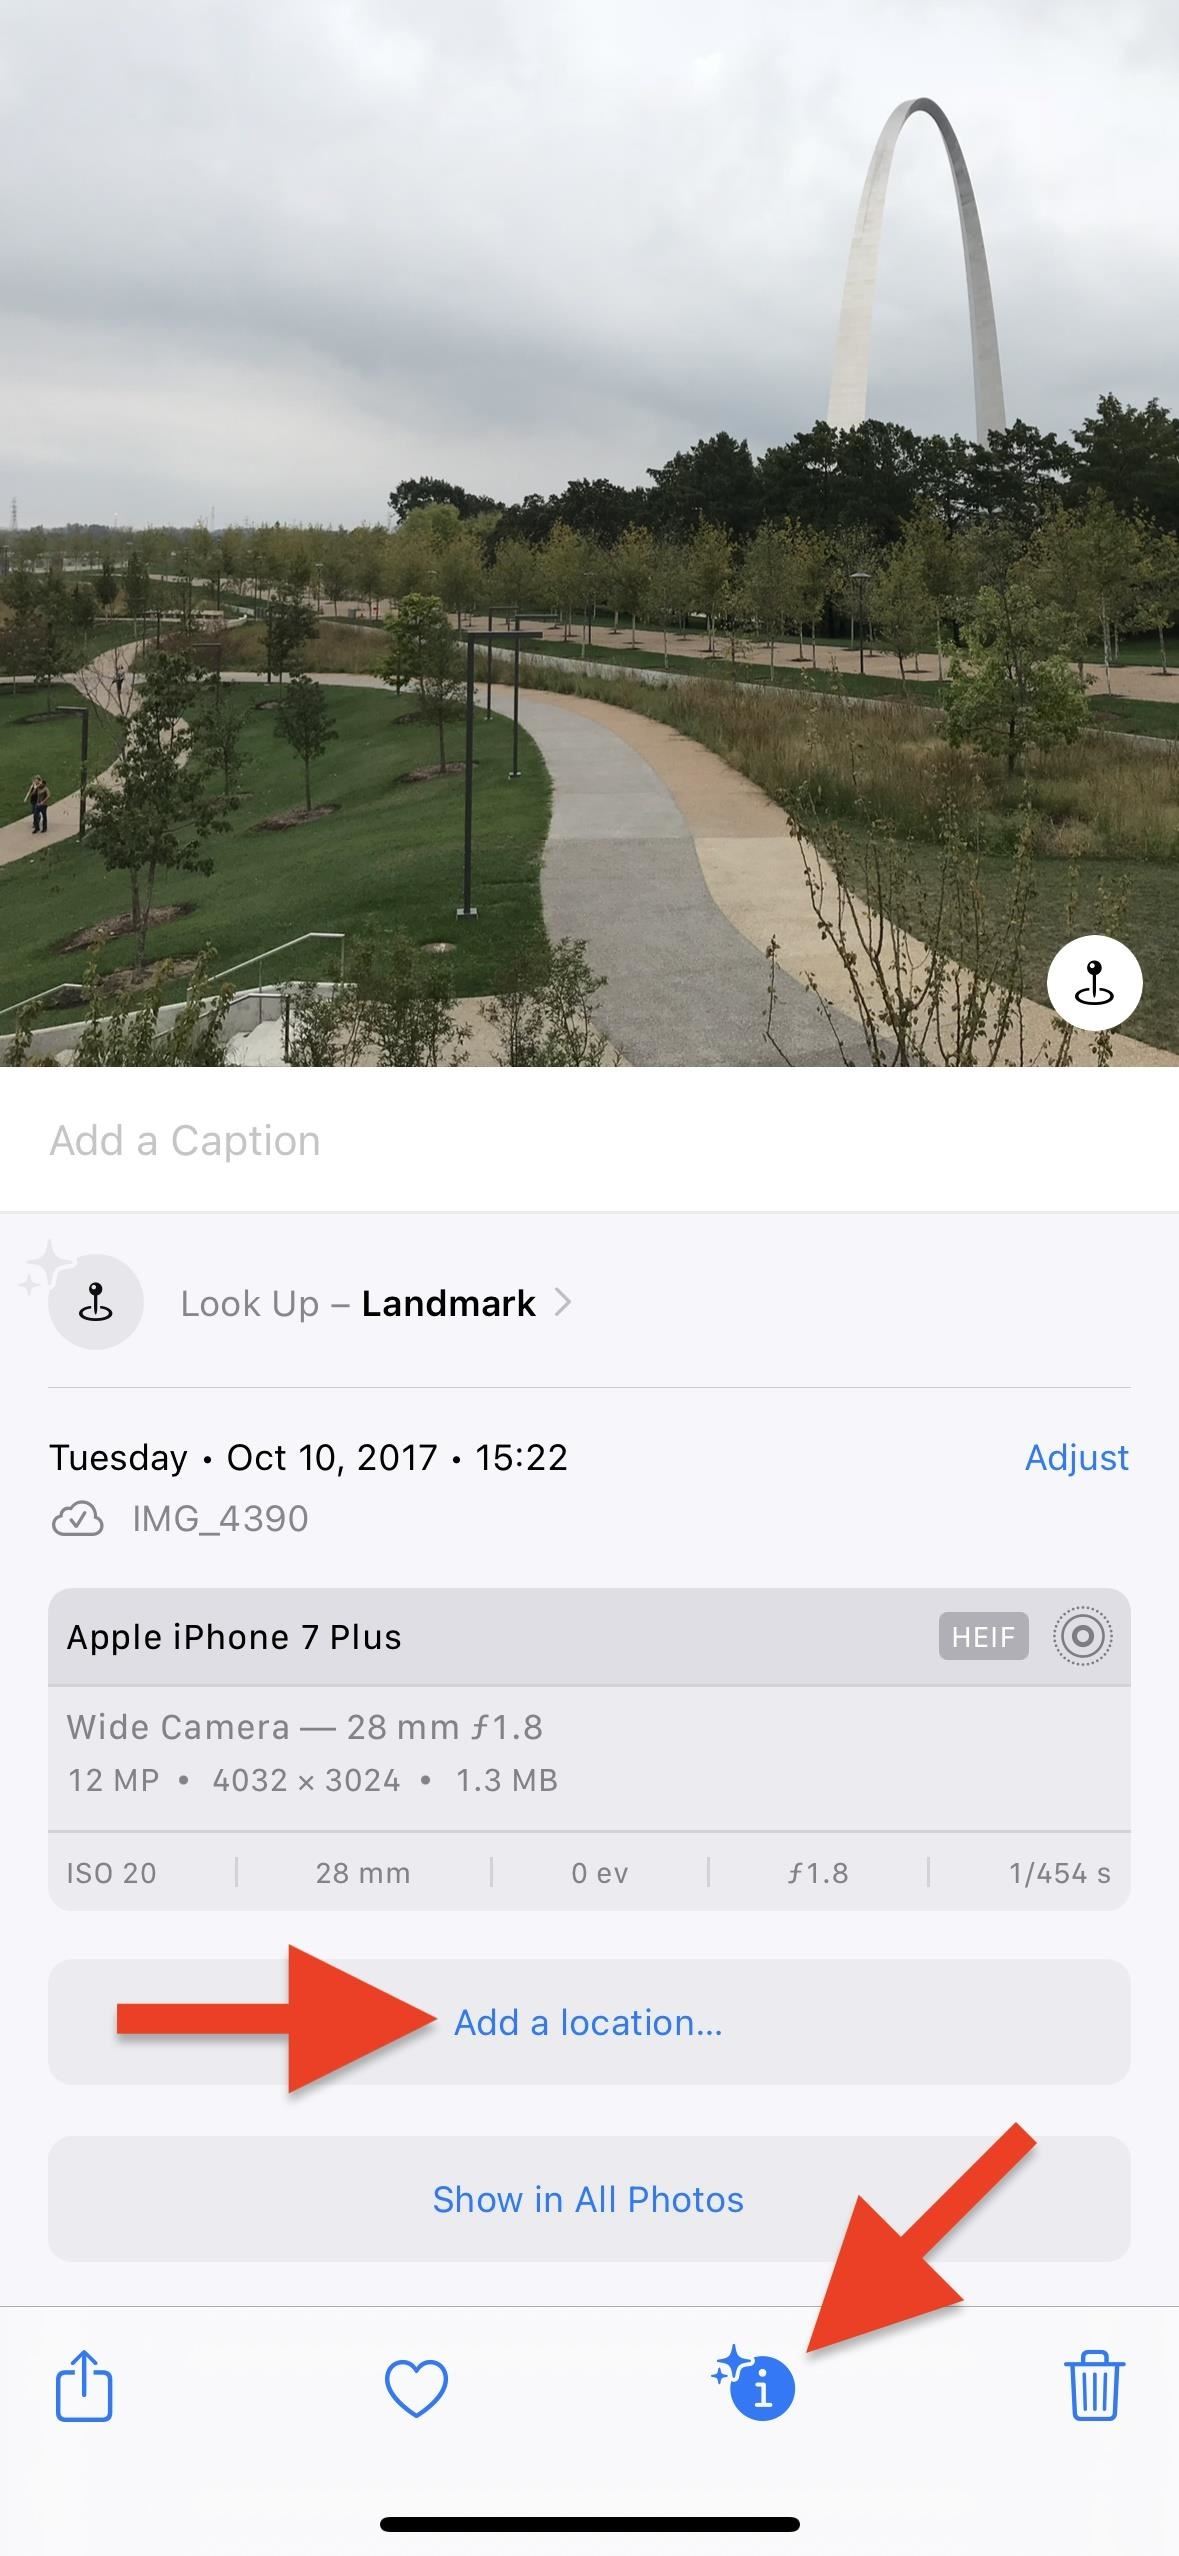 It's Easy to Falsify Photo Geotags on Your iPhone to Keep Real Locations Secret